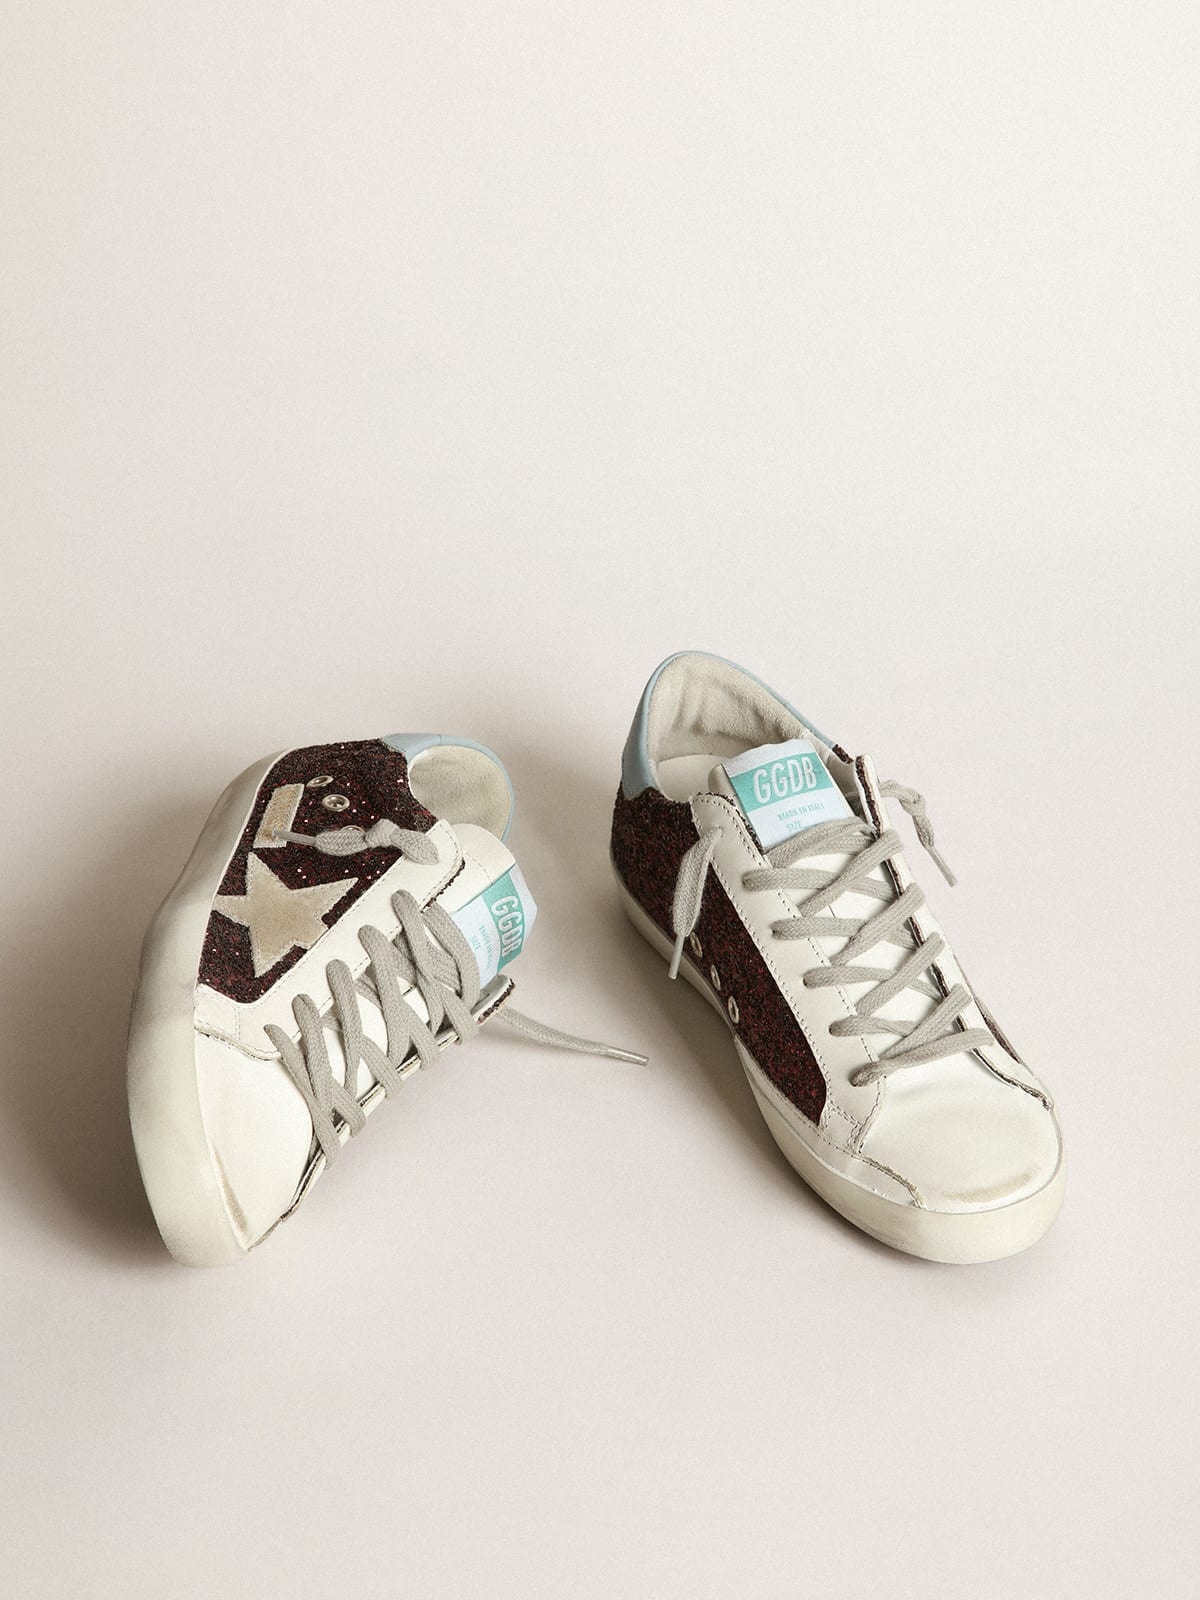 Super-Star sneakers in burgundy glitter with ice-gray suede star and light blue leather heel tab - 2